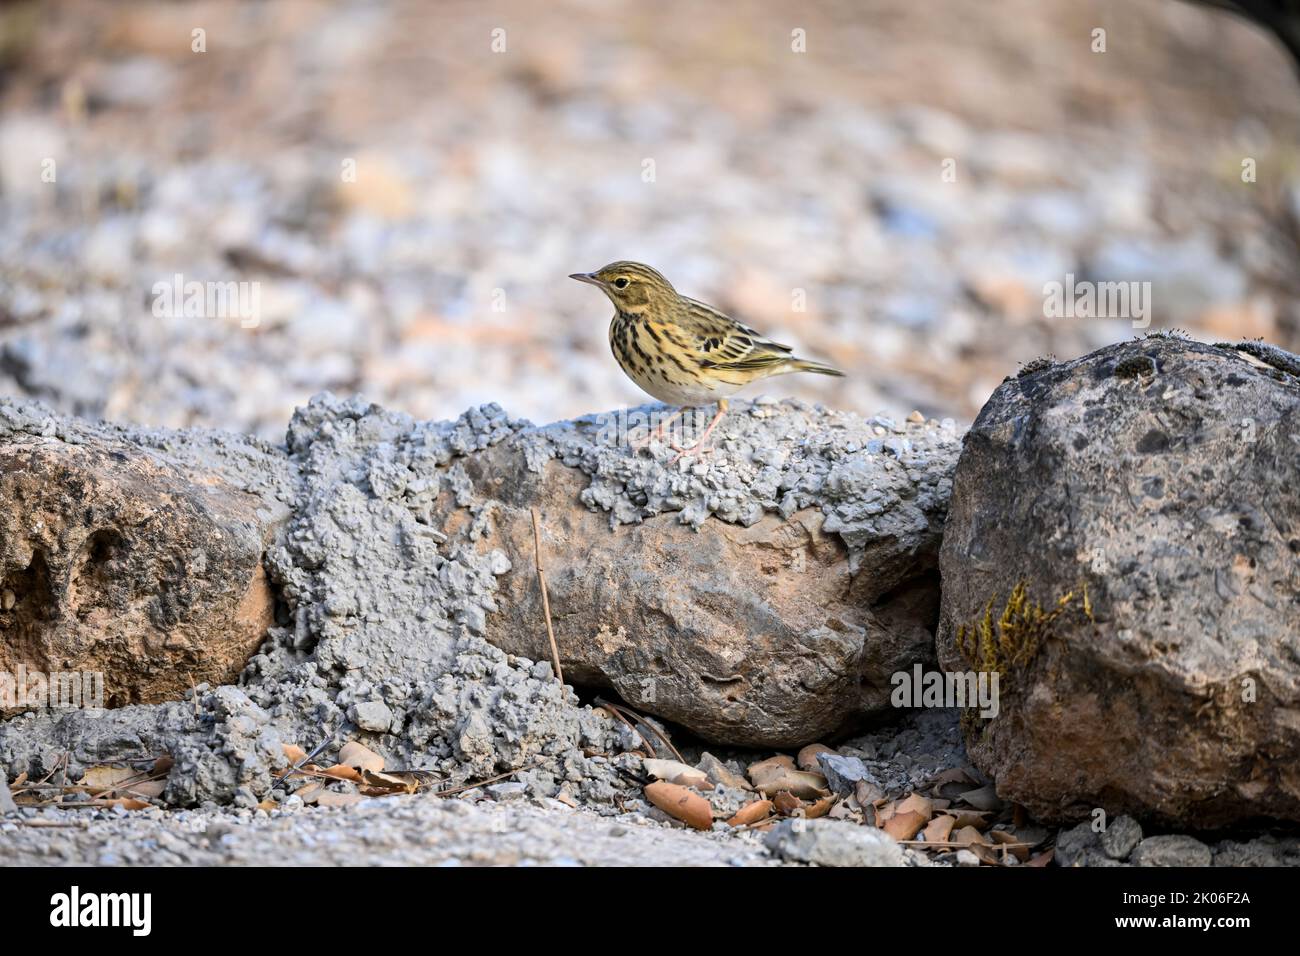 Anthus trivialis or Tree Pipit, is a species of passerine bird in the Motacillidae family. Stock Photo